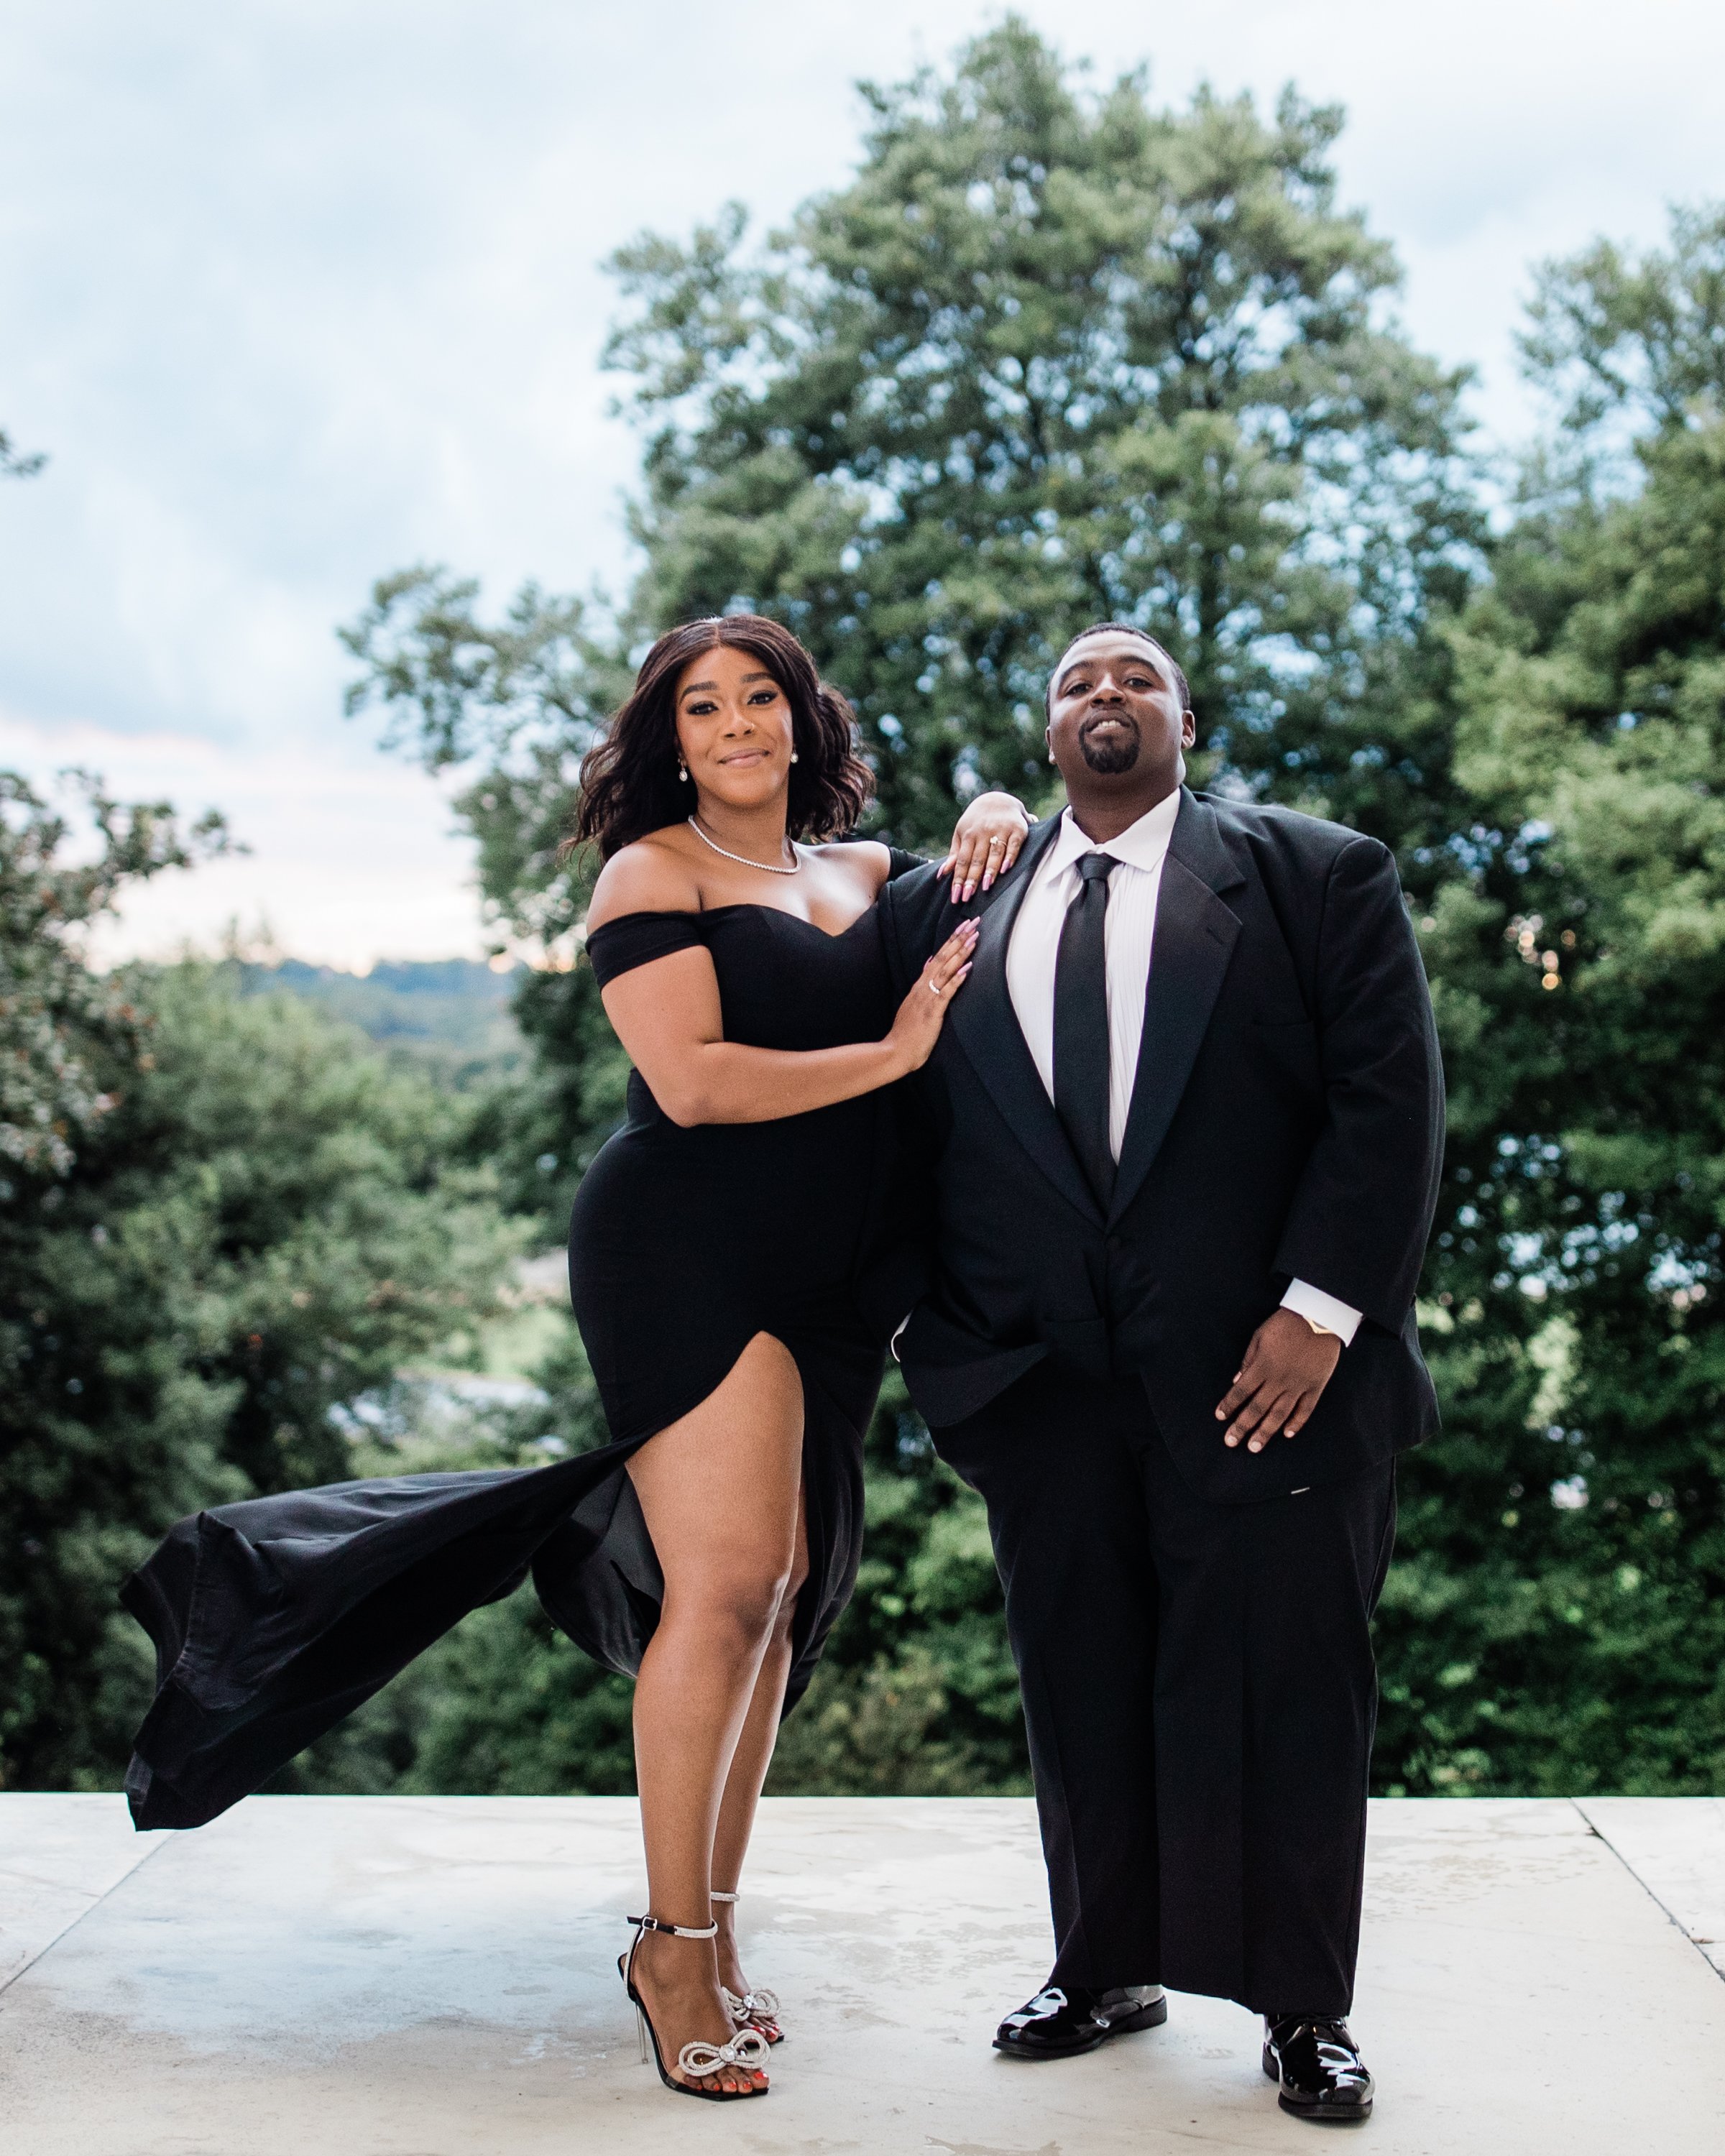 Best Black Wedding Photographers in Washington DC Megapixels Media Photography Engagement Photos at the Lincoln Memorial-37.jpg